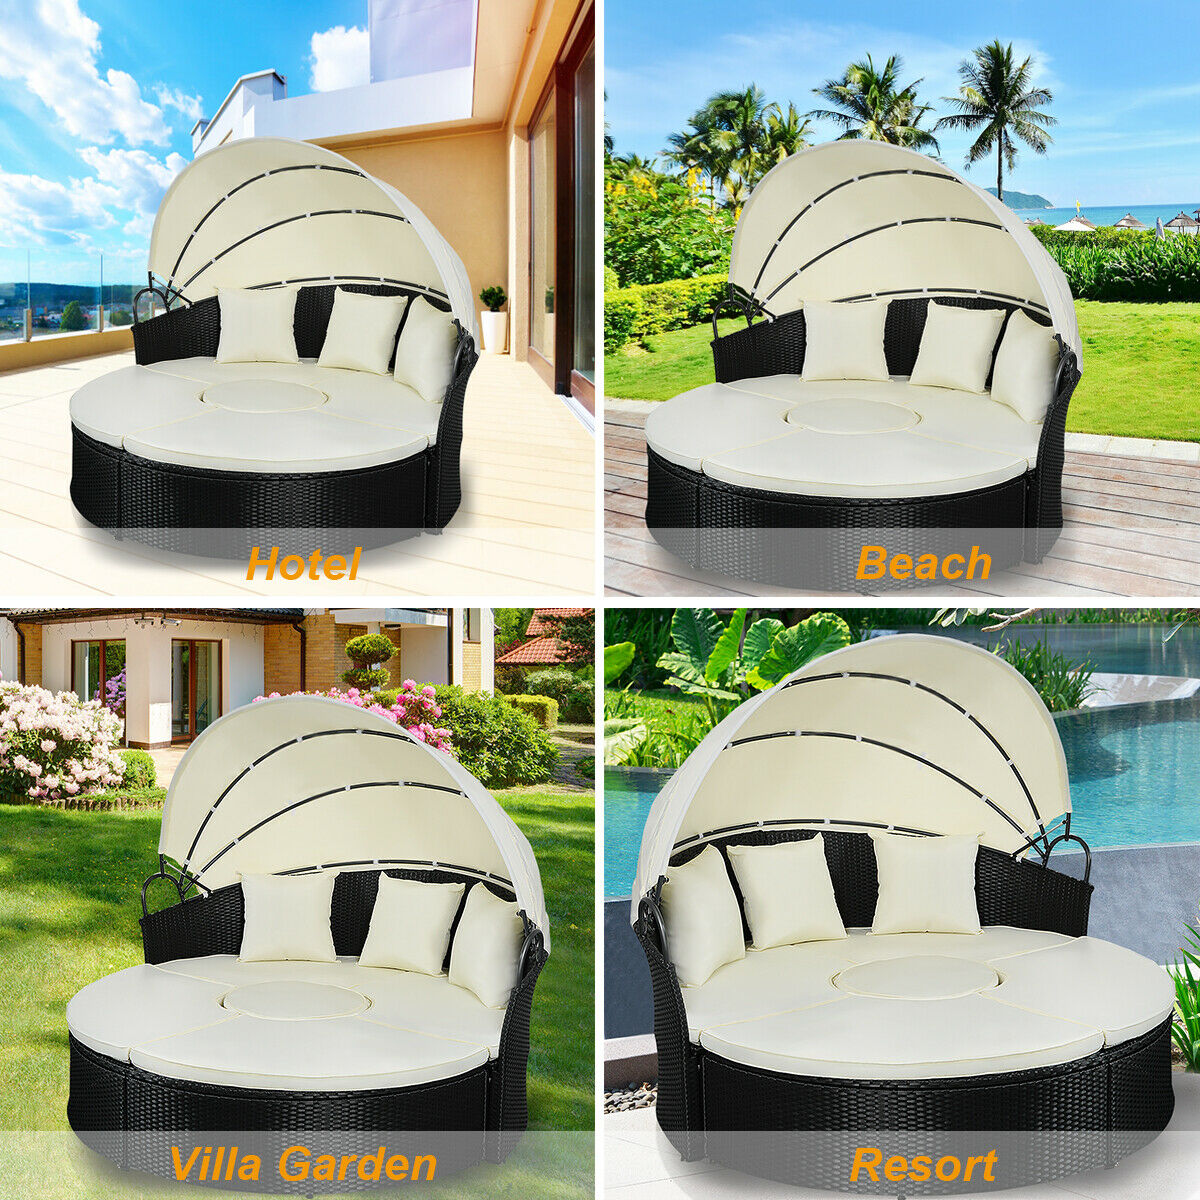 Costway Daybed Patio Sofa Furniture Round Retractable Canopy Wicker Rattan Outdoor - image 5 of 10